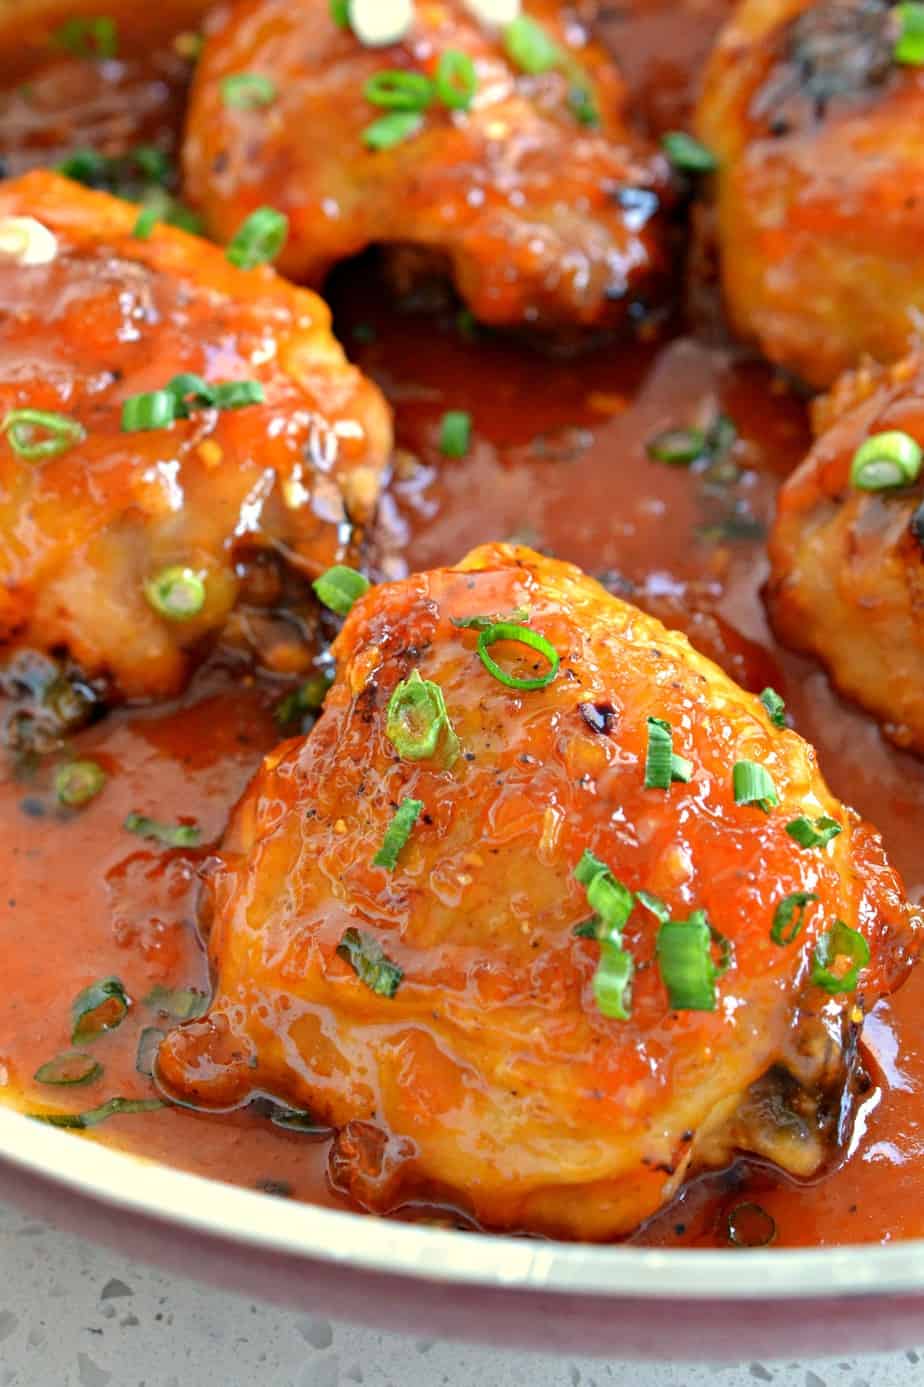 Apricot preserves are combined with garlic, soy sauce and ginger creating a mouthwatering glaze in this Apricot Chicken.